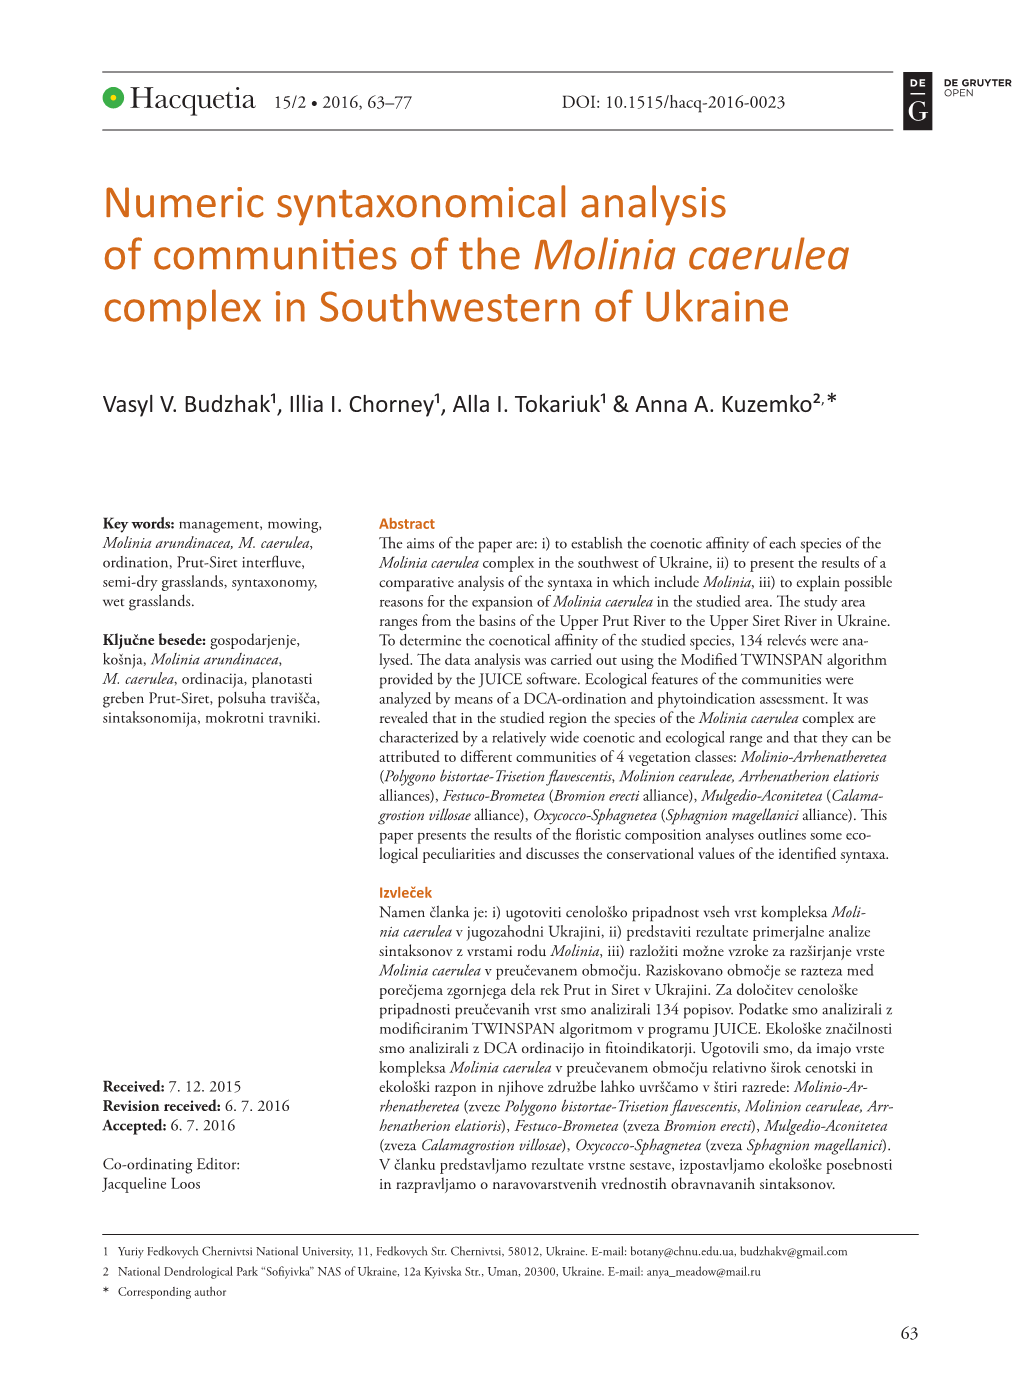 Numeric Syntaxonomical Analysis of Communities of the Molinia Caerulea Complex in Southwestern of Ukraine